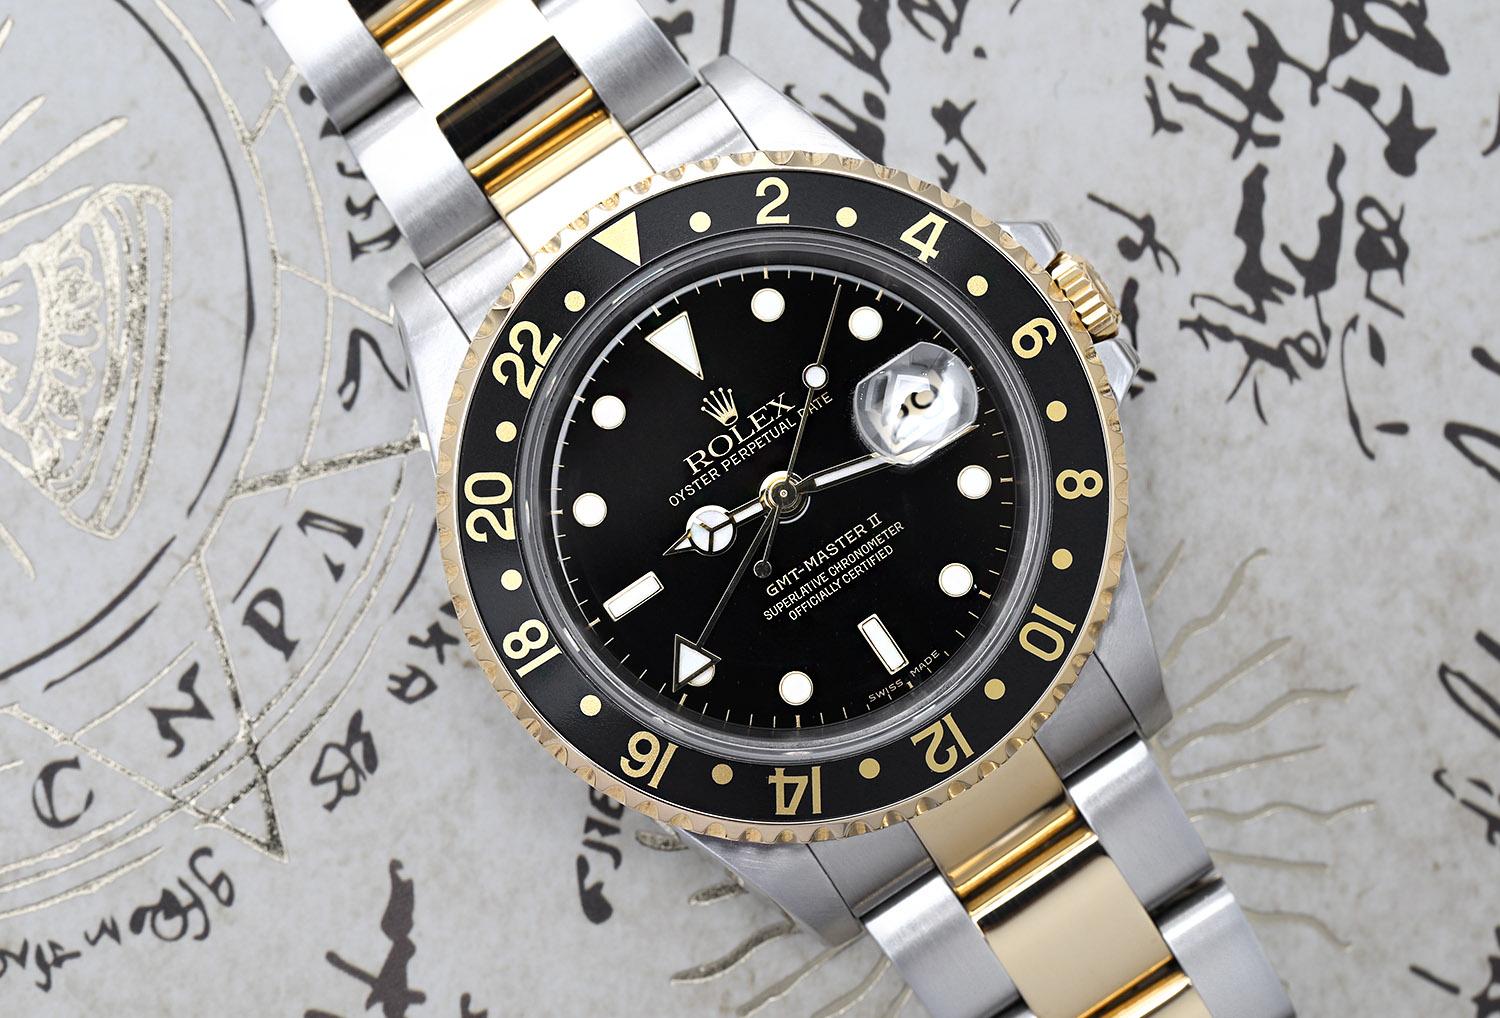 Our company is a premiere distributor of pre-owned and new watches, where we guarantee complete authenticity and corresponding aesthetic to all of our timepieces. The watch is fully polished, expertly serviced, and comes with a Rolex Box, Papers and